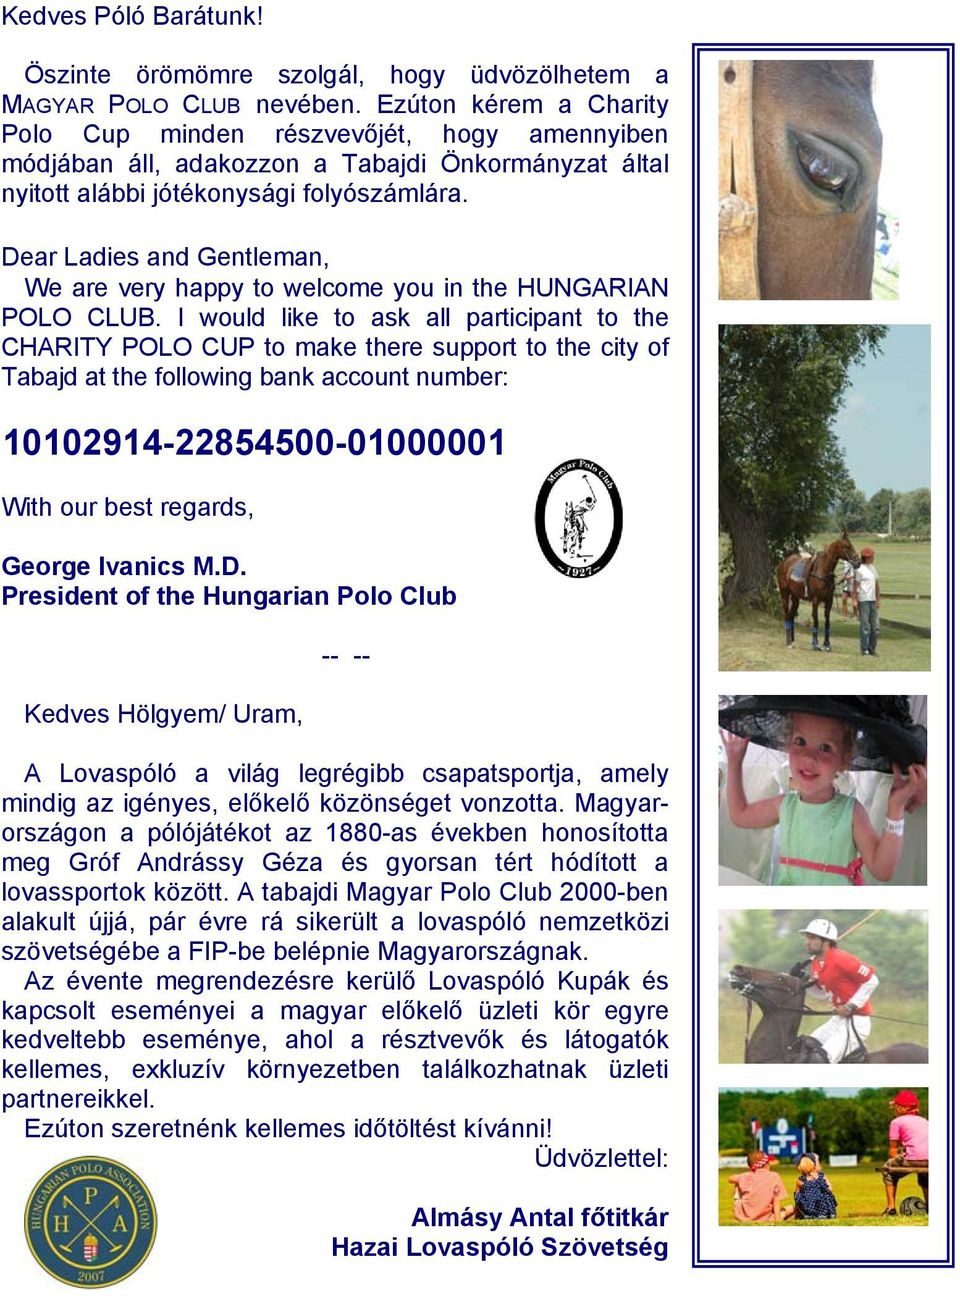 Dear Ladies and Gentleman, We are very happy to welcome you in the HUNGARIAN POLO CLUB.